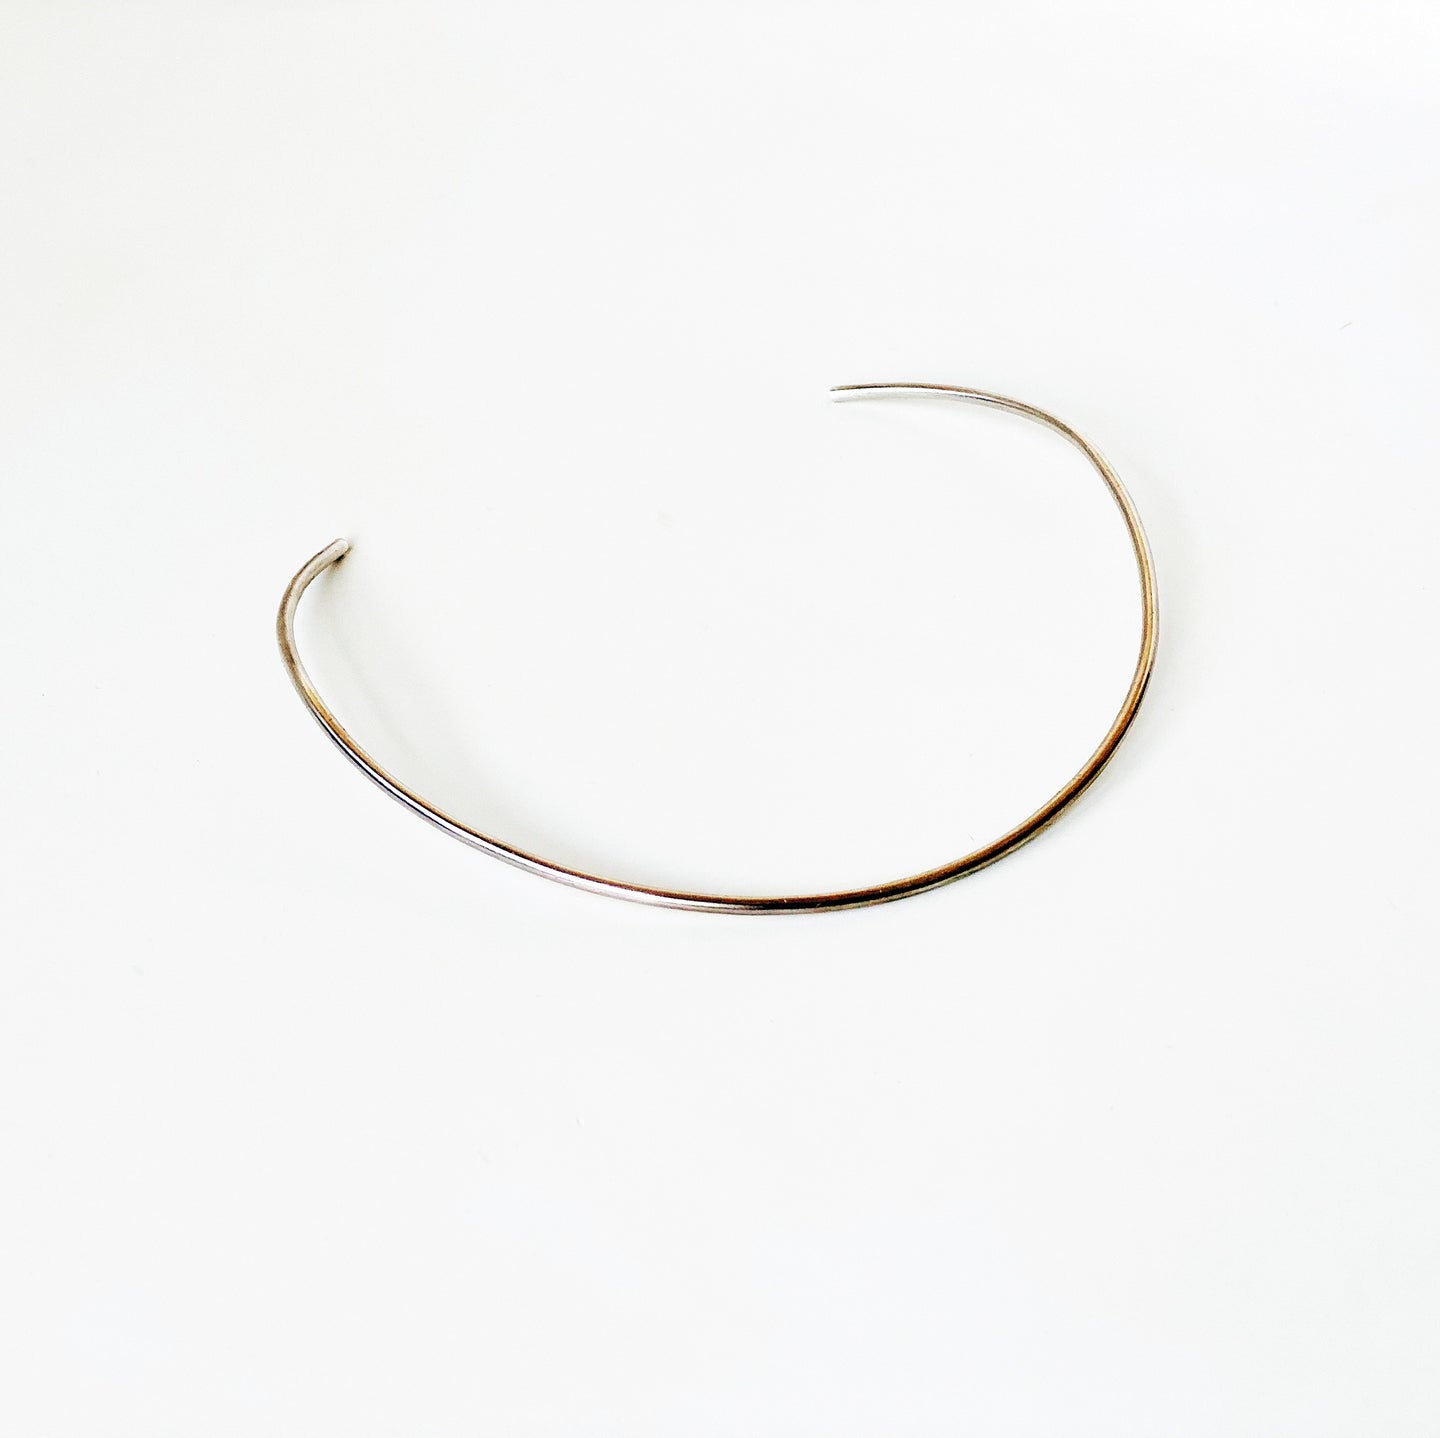 Simplicity Open Collar Wire Choker - Sterling Silver in Polish, Patina, or Satin Finish - TIN HAUS® Jewelry